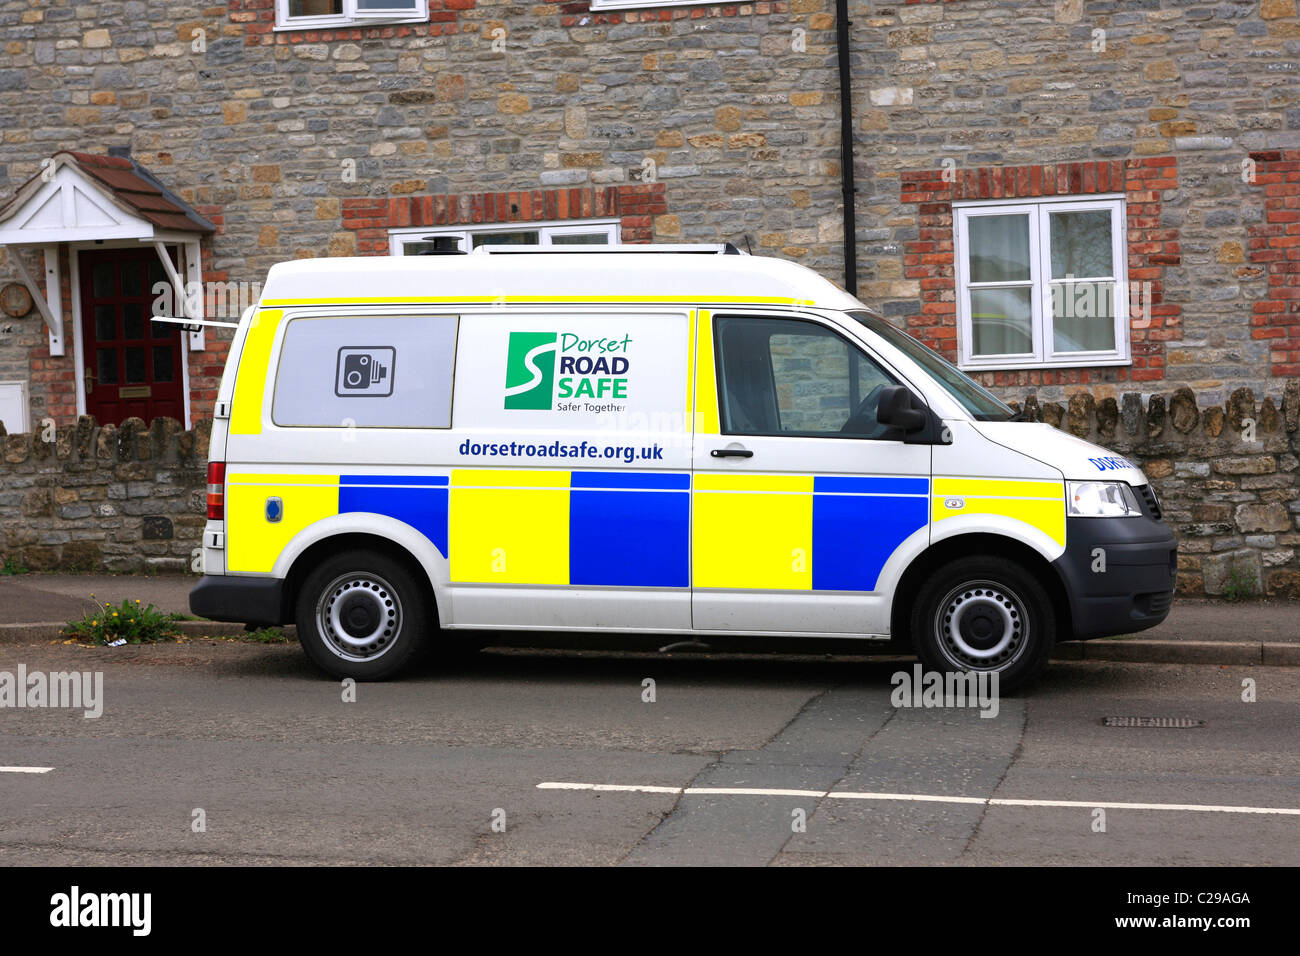 A Dorset Mobile Speed Camera Vehicle used for spot check on roads known for drivers who exceed the speed limits Stock Photo